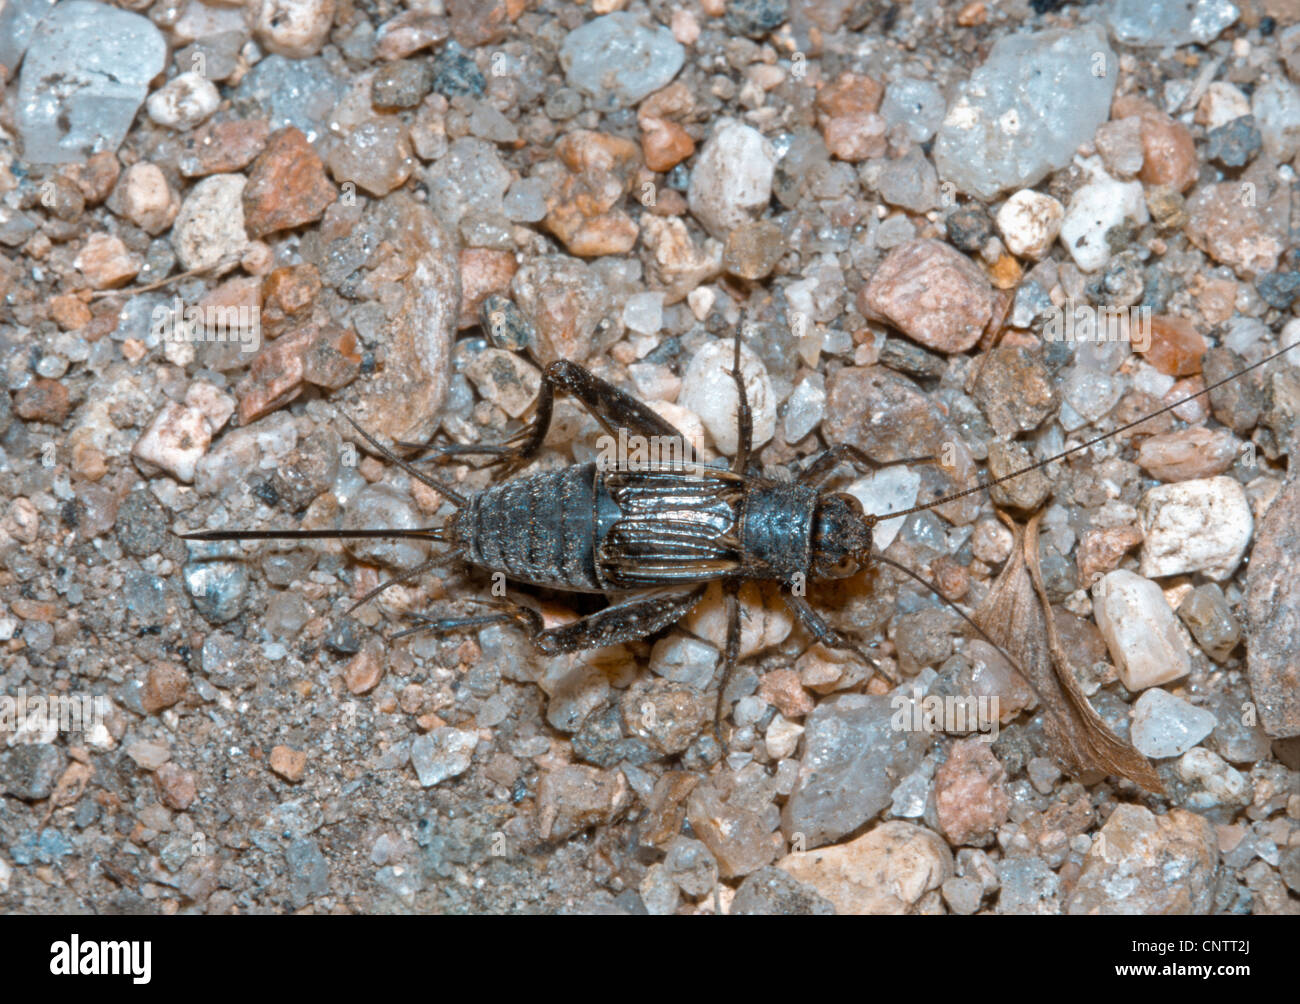 Overhead view of female Field Cricket (Gryllus assimilis), showing ovipositor and cerci, Colorado US. Stock Photo